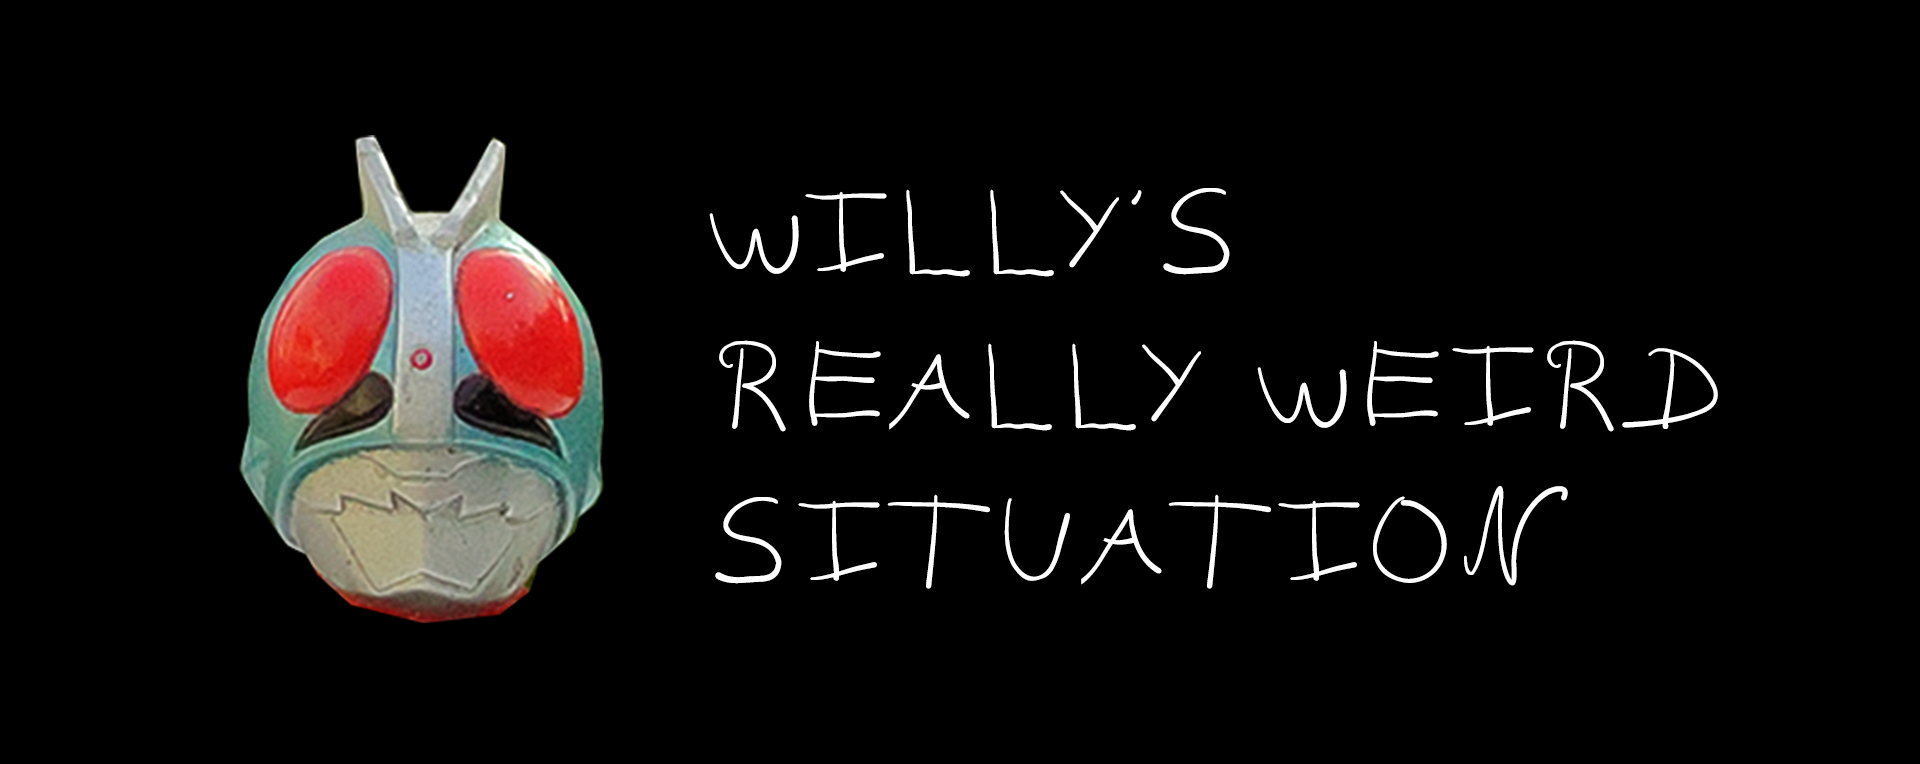 Willy's Really Weird Situation